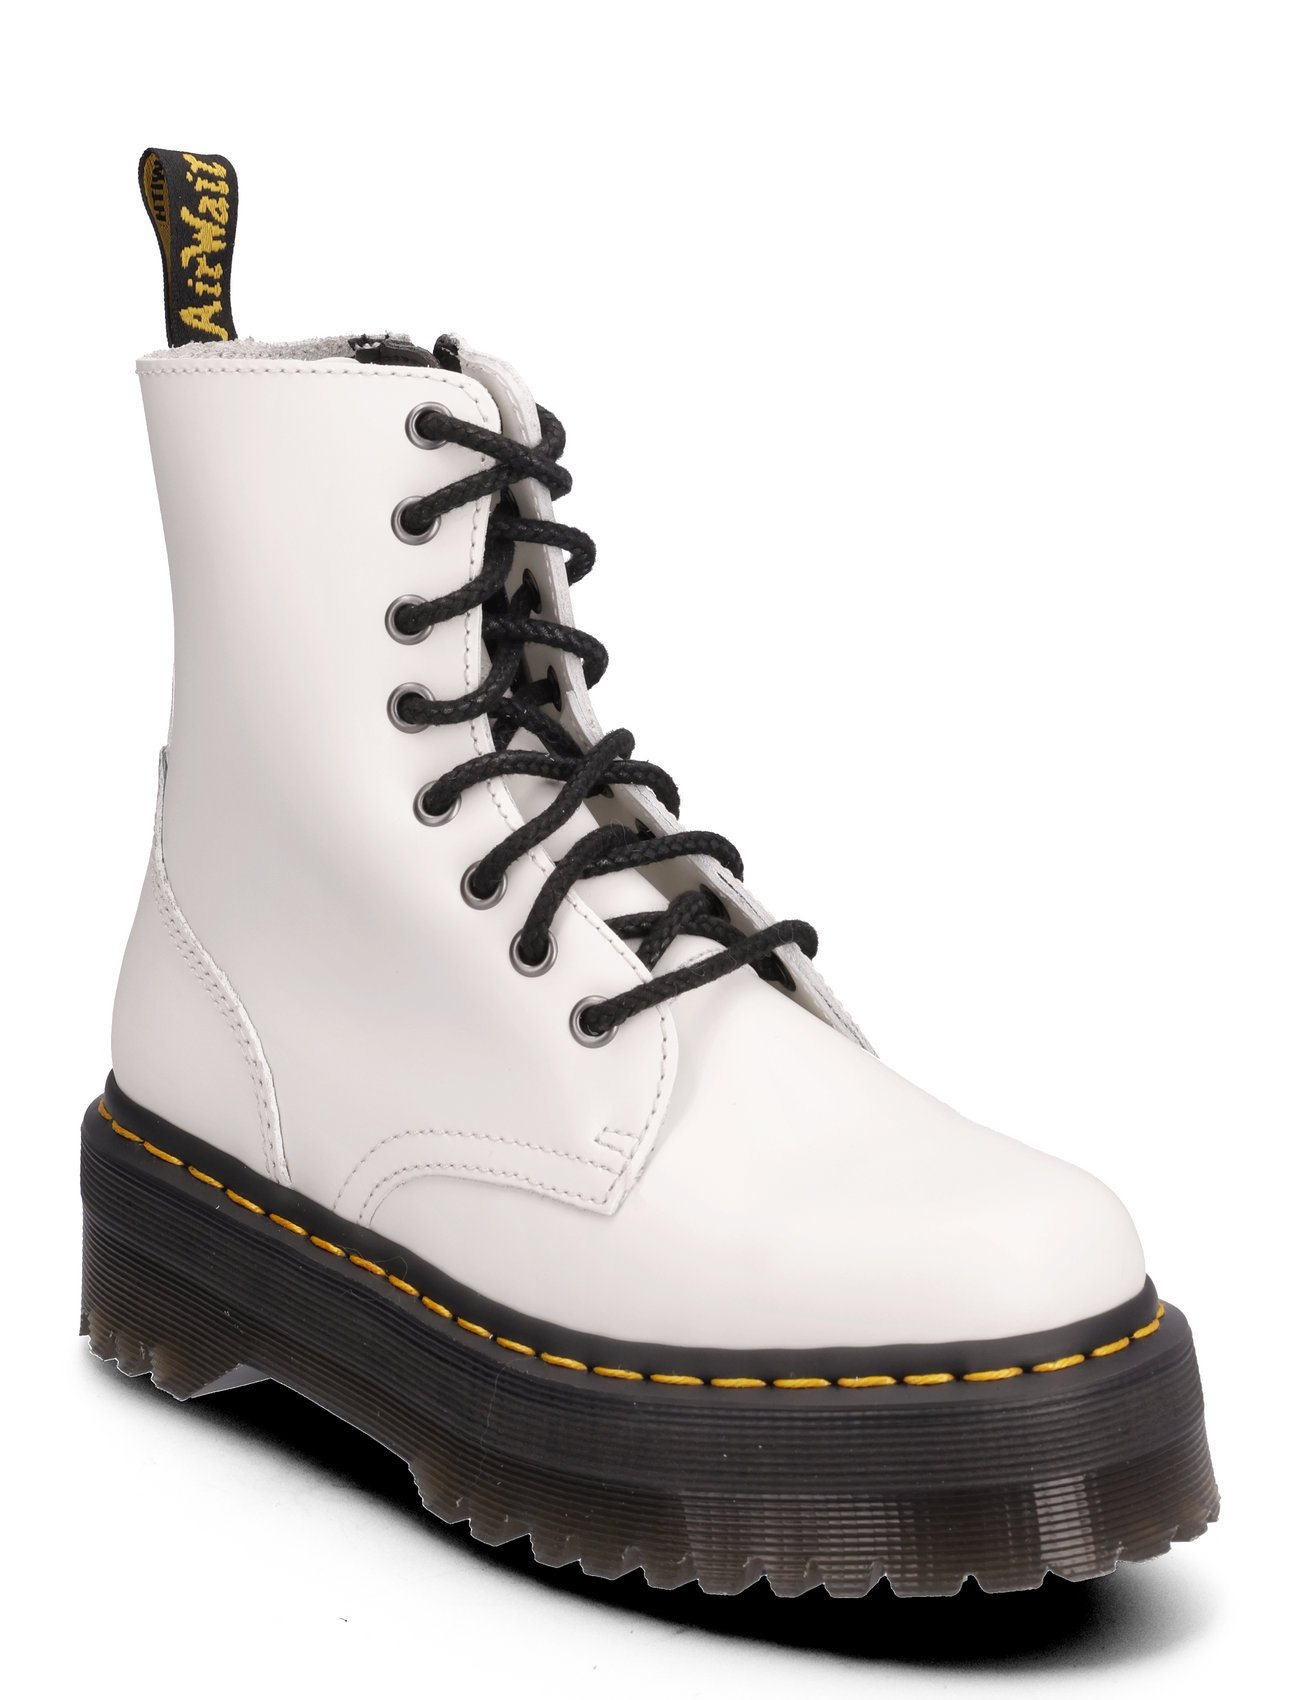 Jadon White Polished Smooth Shoes Boots Ankle Boots Ankle Boots Flat Heel White Dr. Martens